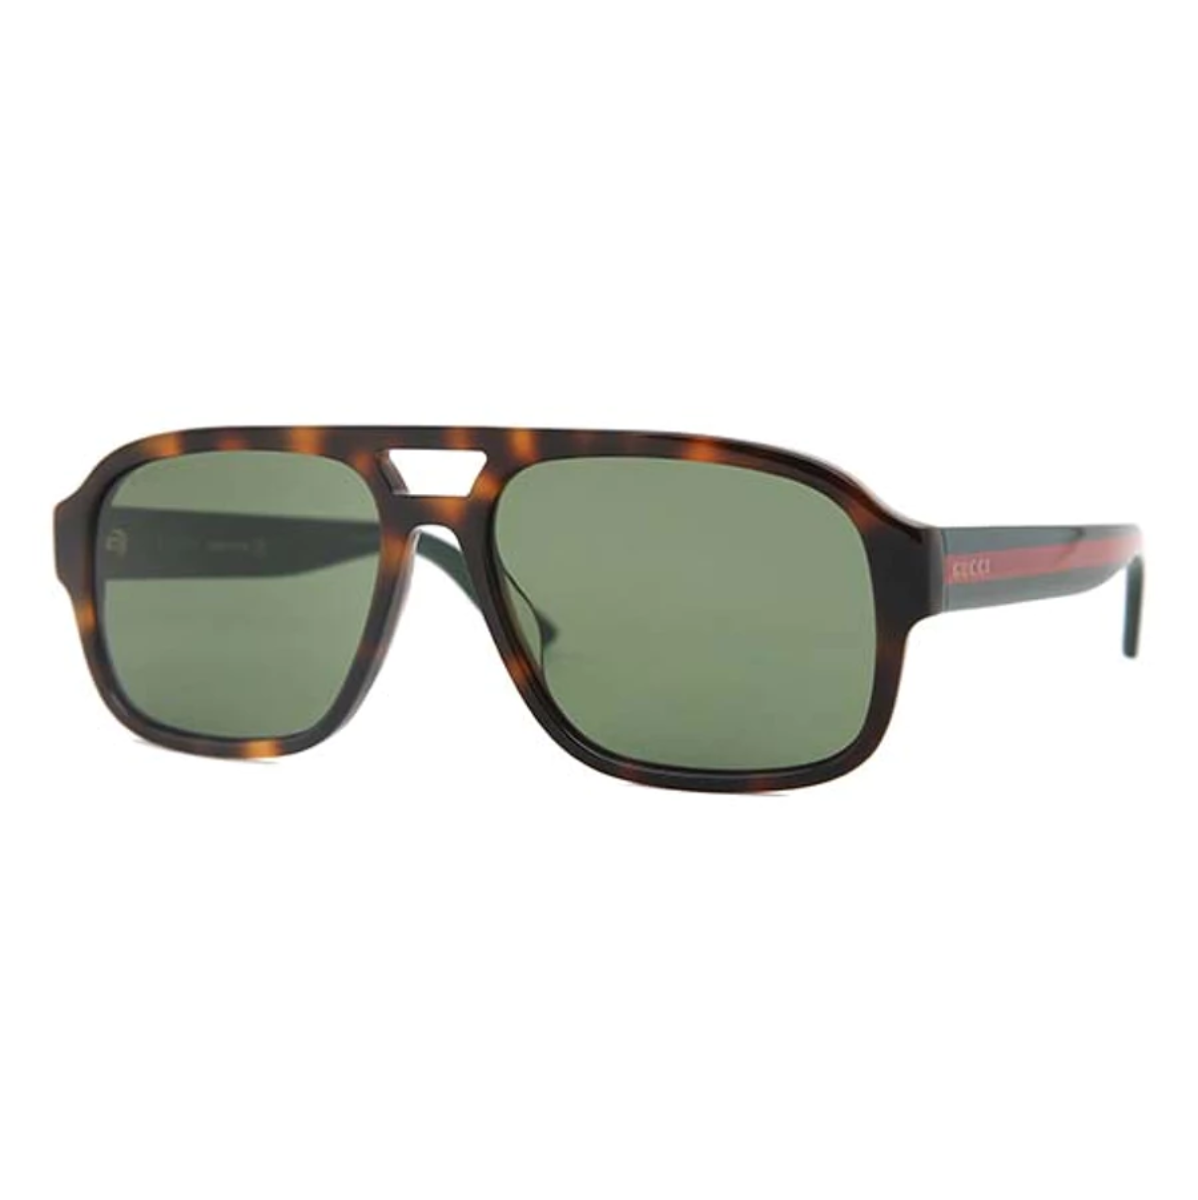 Stylish Gucci Sunglasses - Model 0925 sunglasses offering elegance and UV protection for everyone."